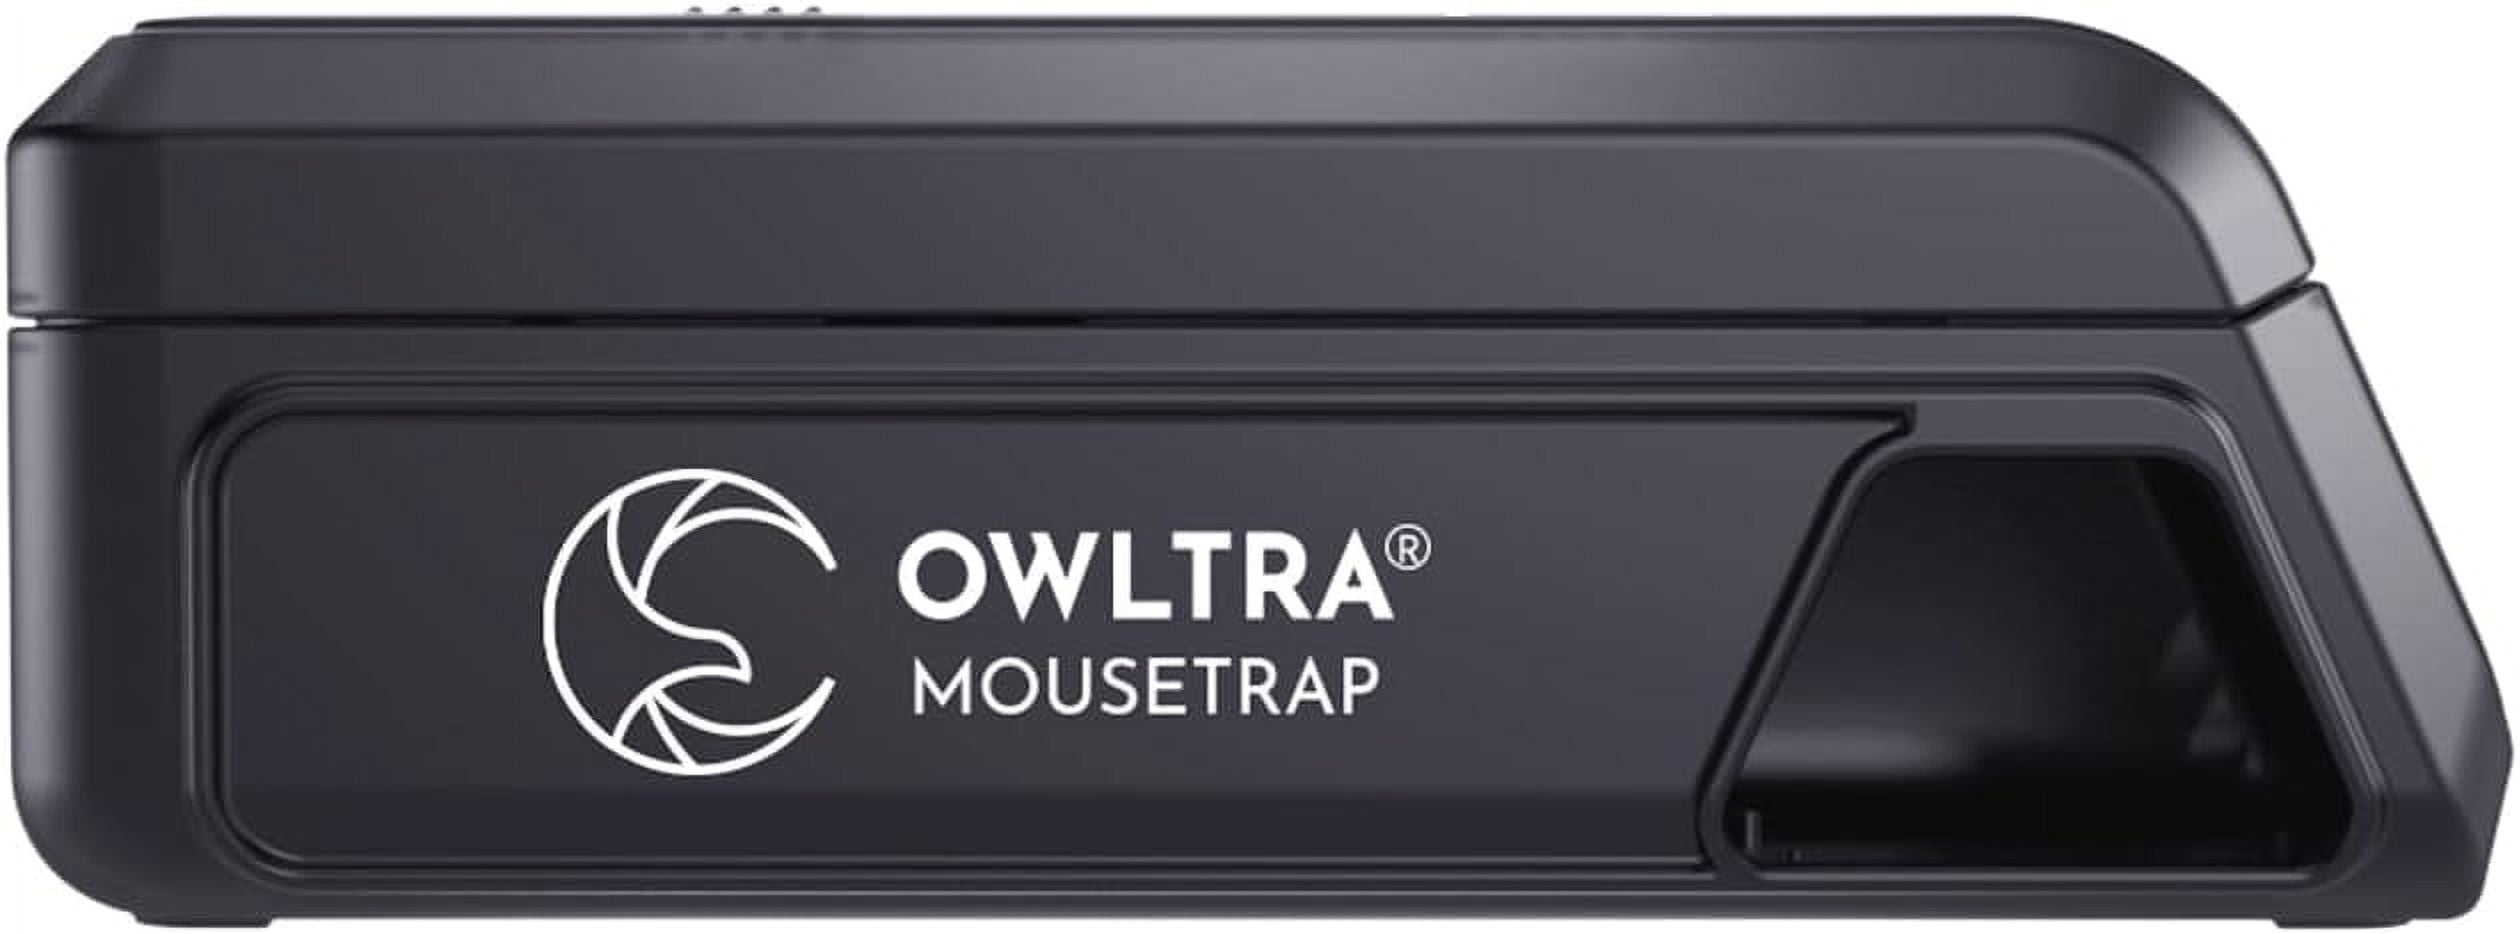 OWLTRA Indoor Electronic Rat and Mouse Defense Kit – Owltra